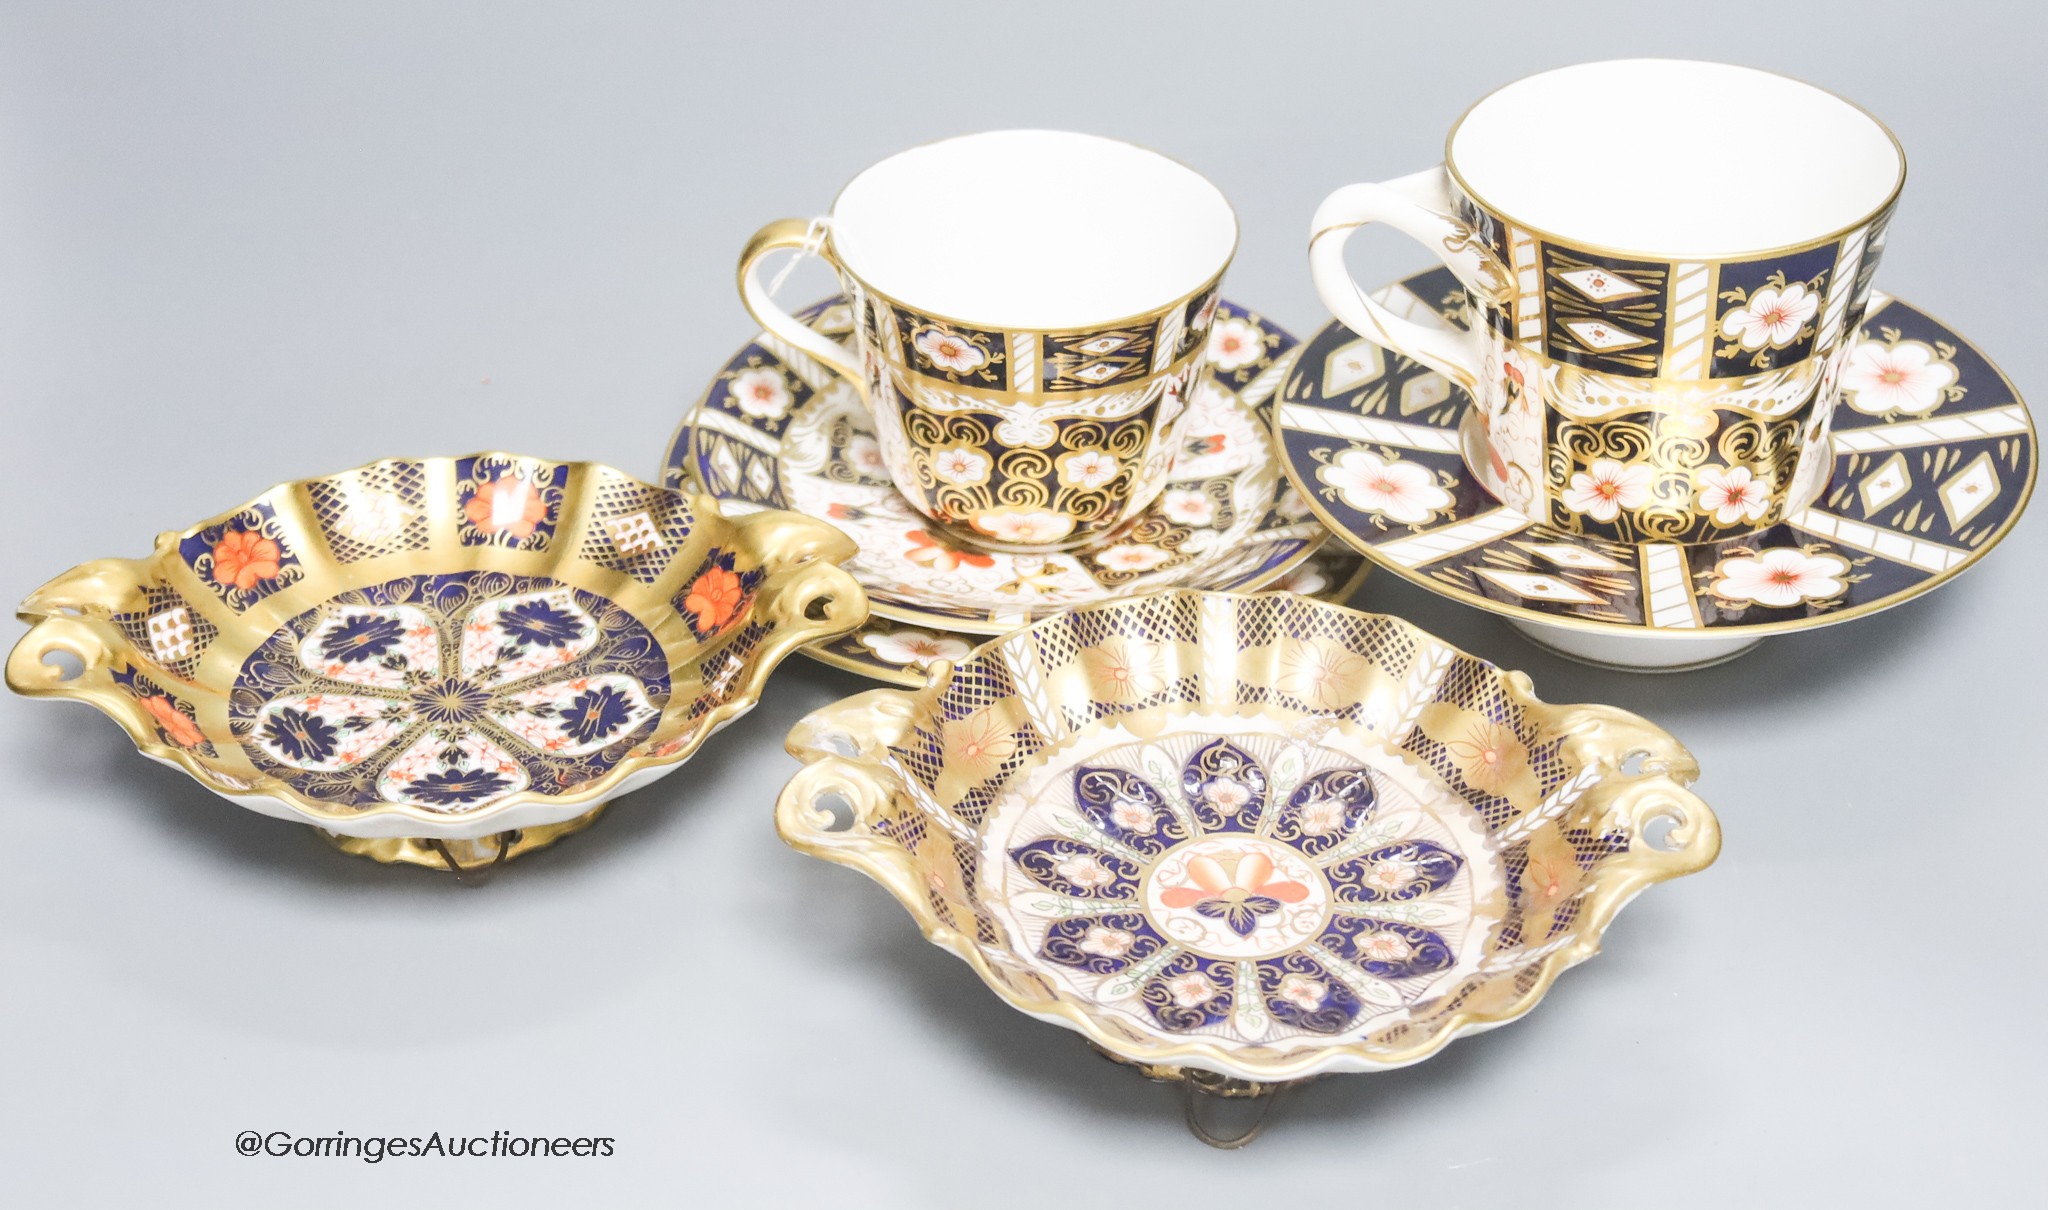 A quantity of Royal Crown Derby cups, plates and dishes